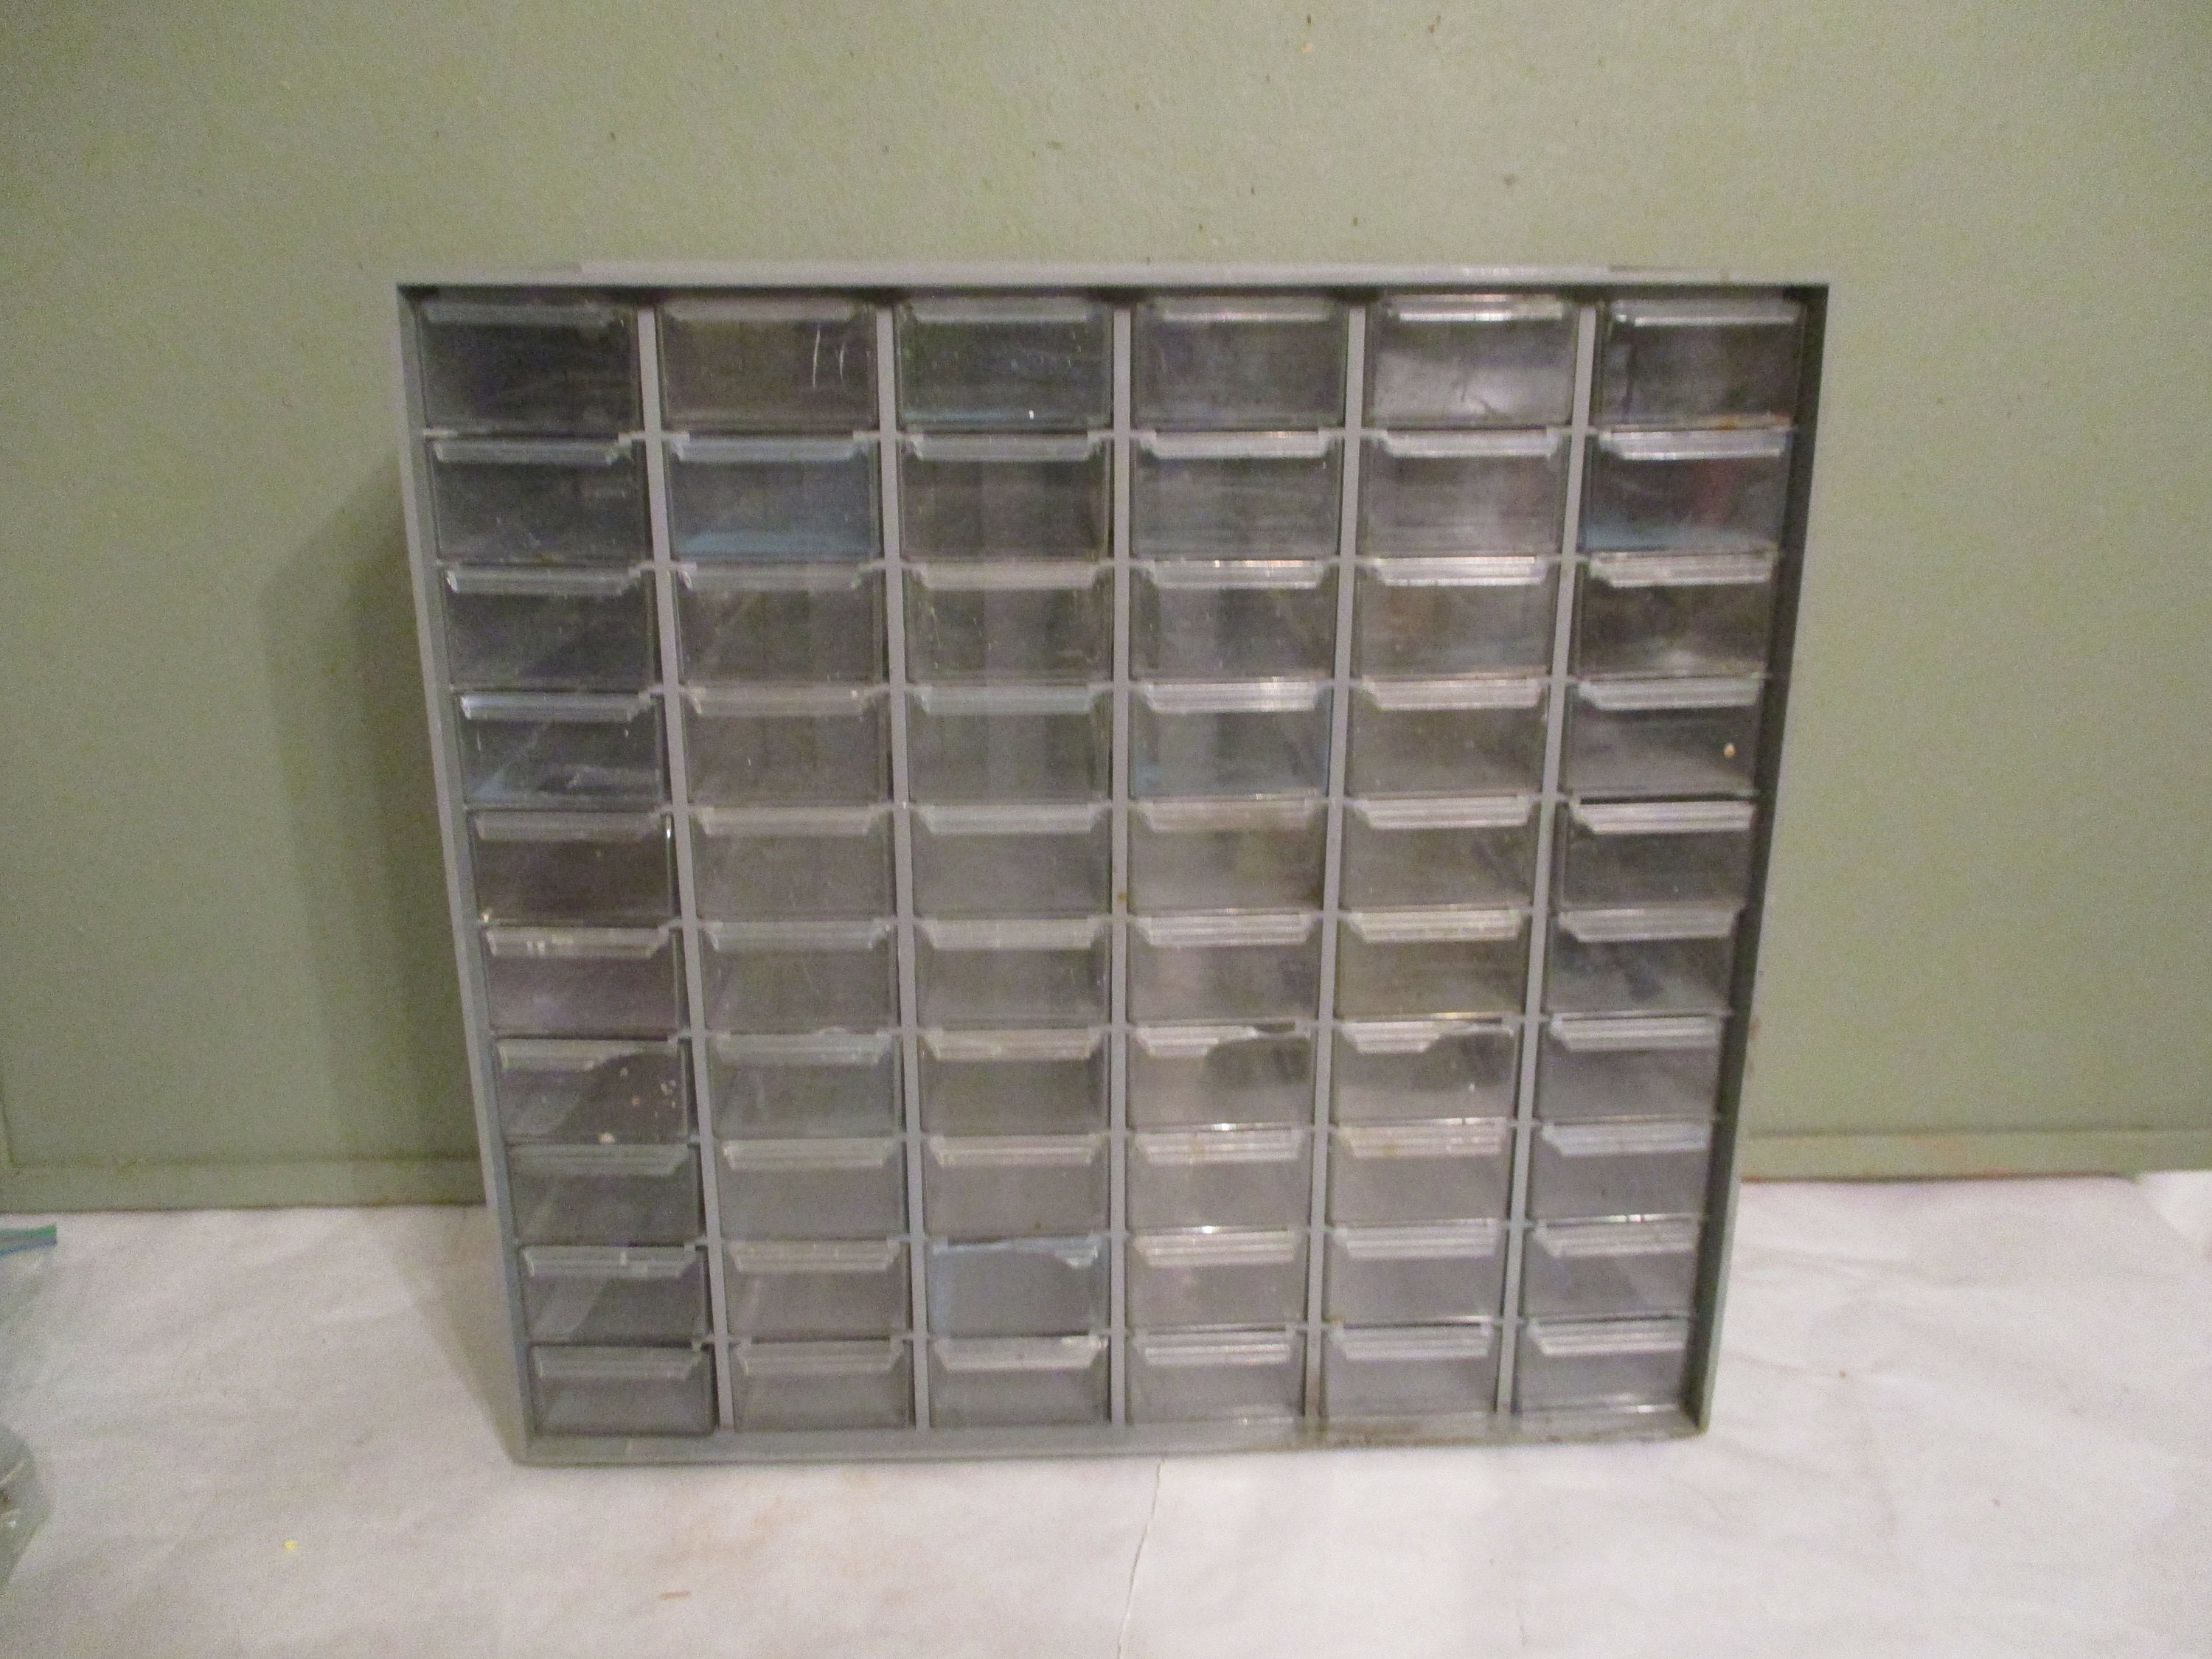 Sortimo Storage DIY Plans for Harbor Freight Organizers 